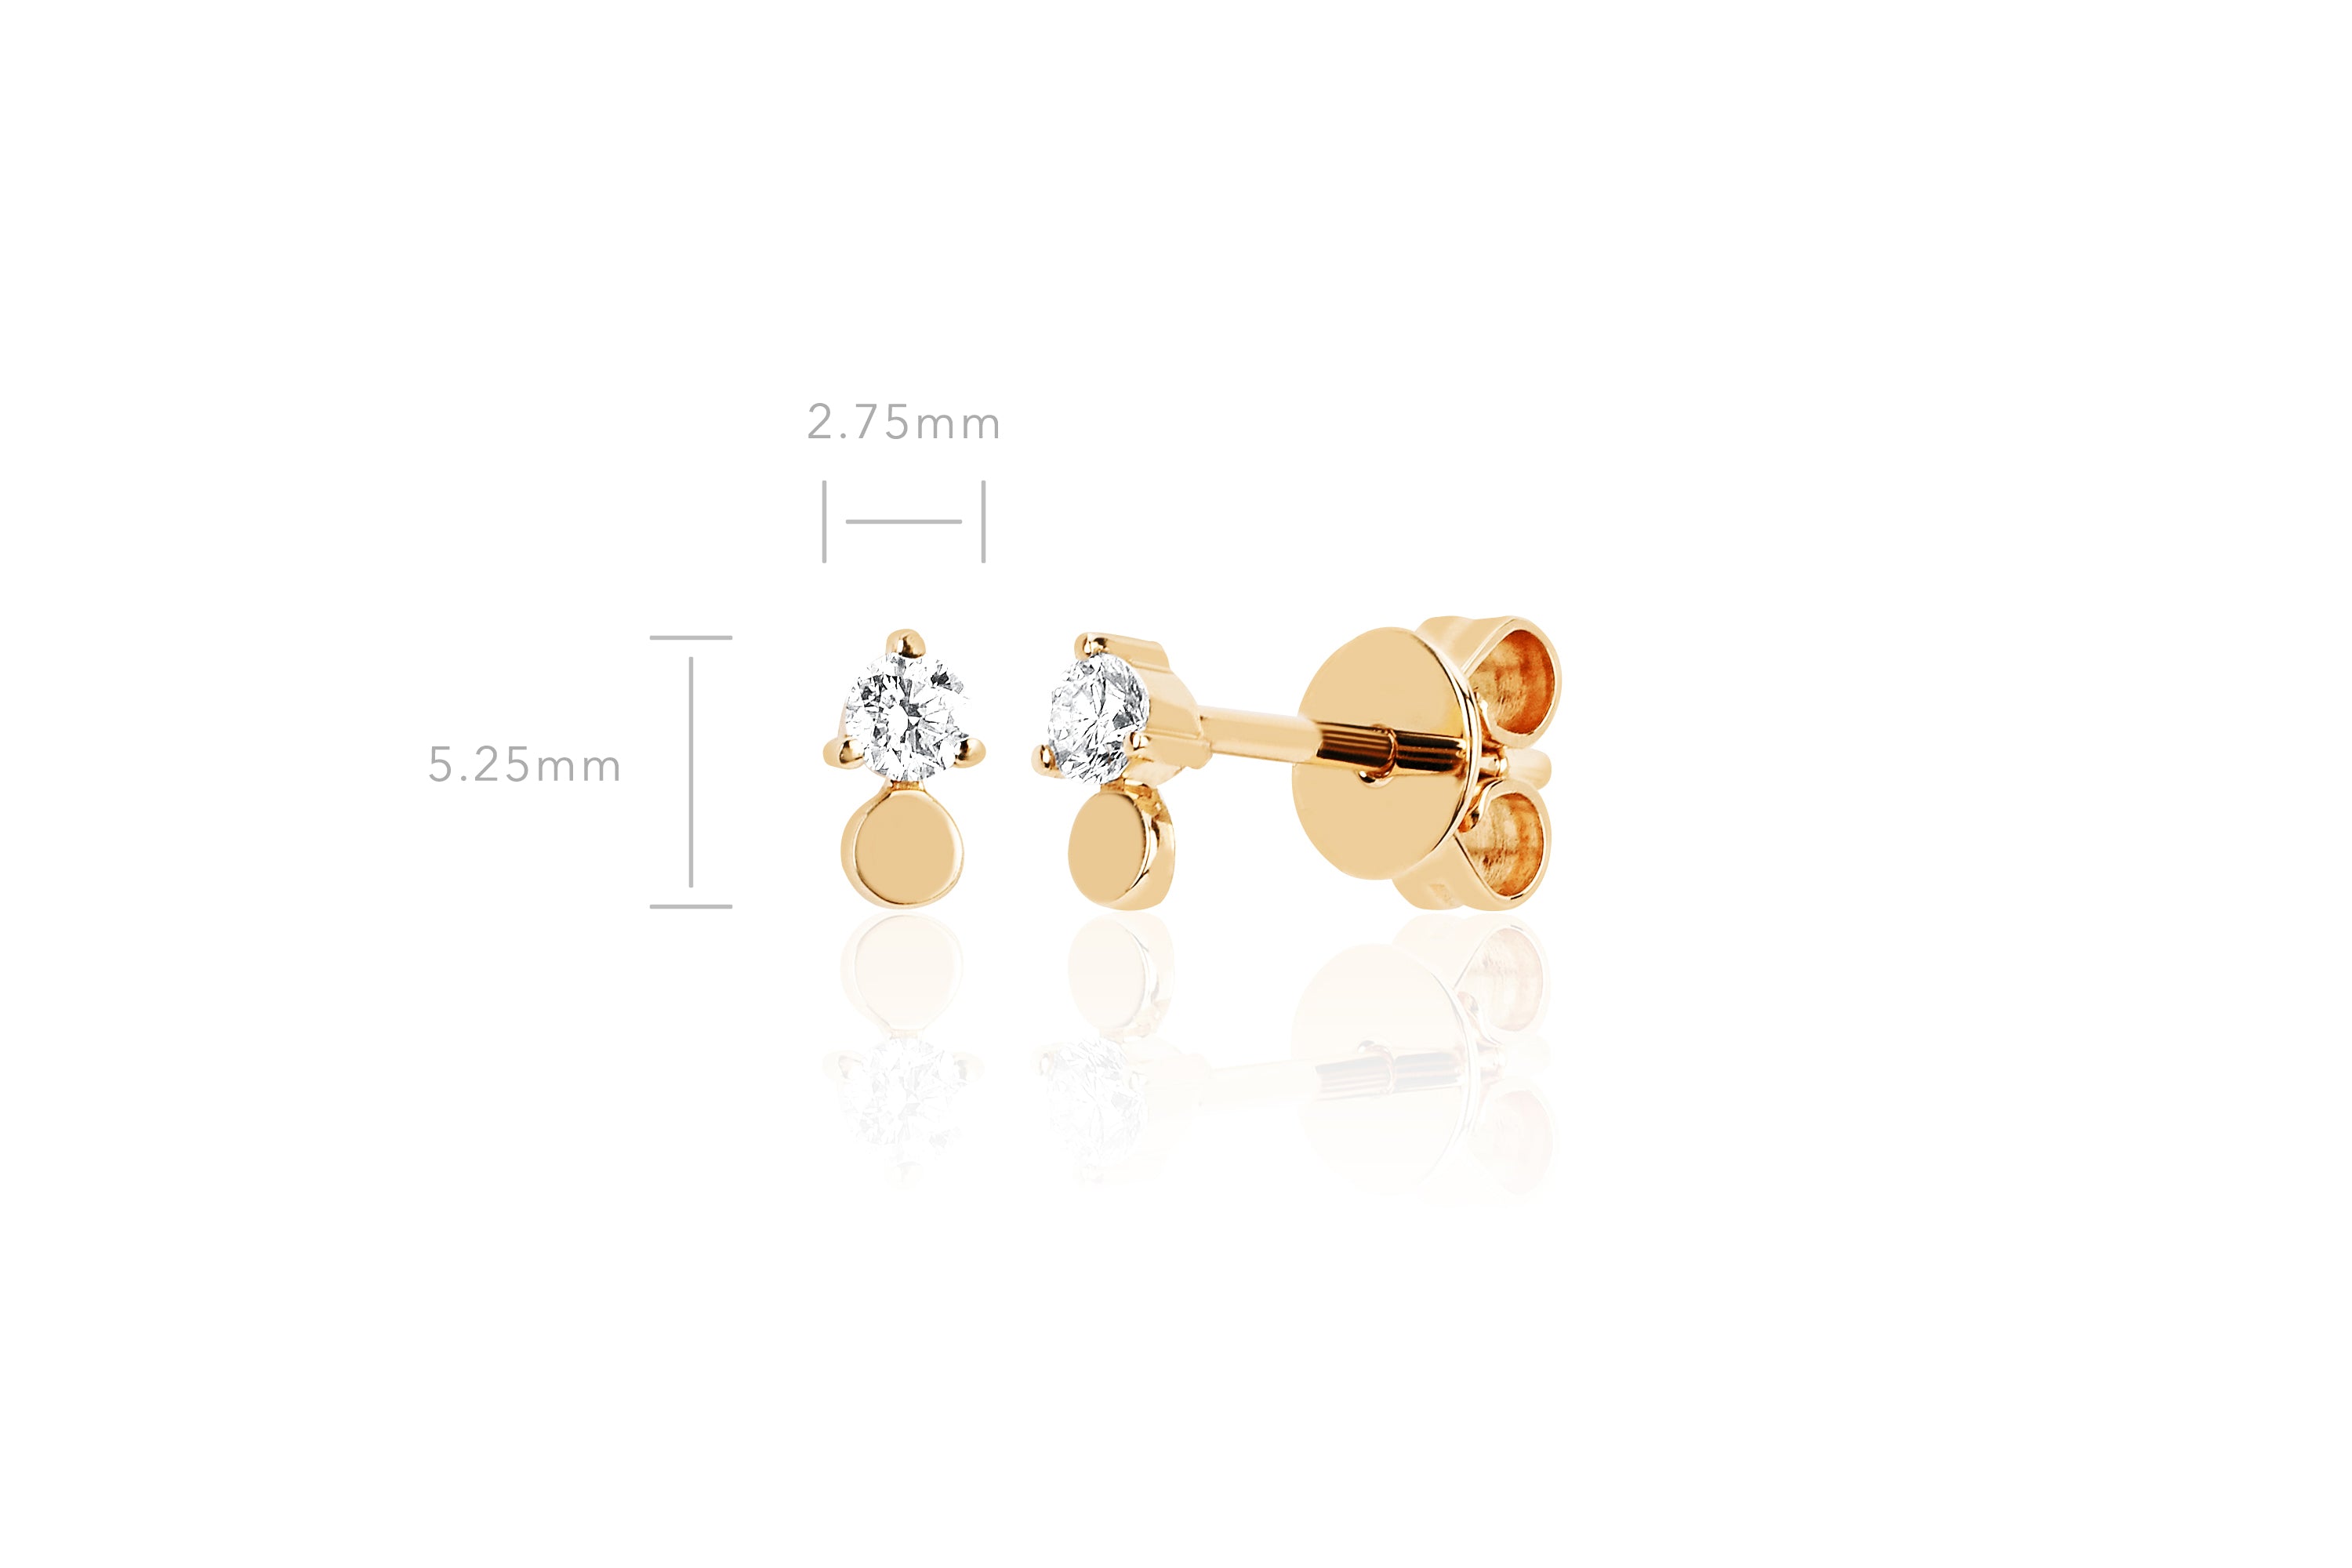 Gold Disc With Prong Set Diamond Stud Earring in 14k yellow gold with size measurements of 5.25mm height and 2.75mm width